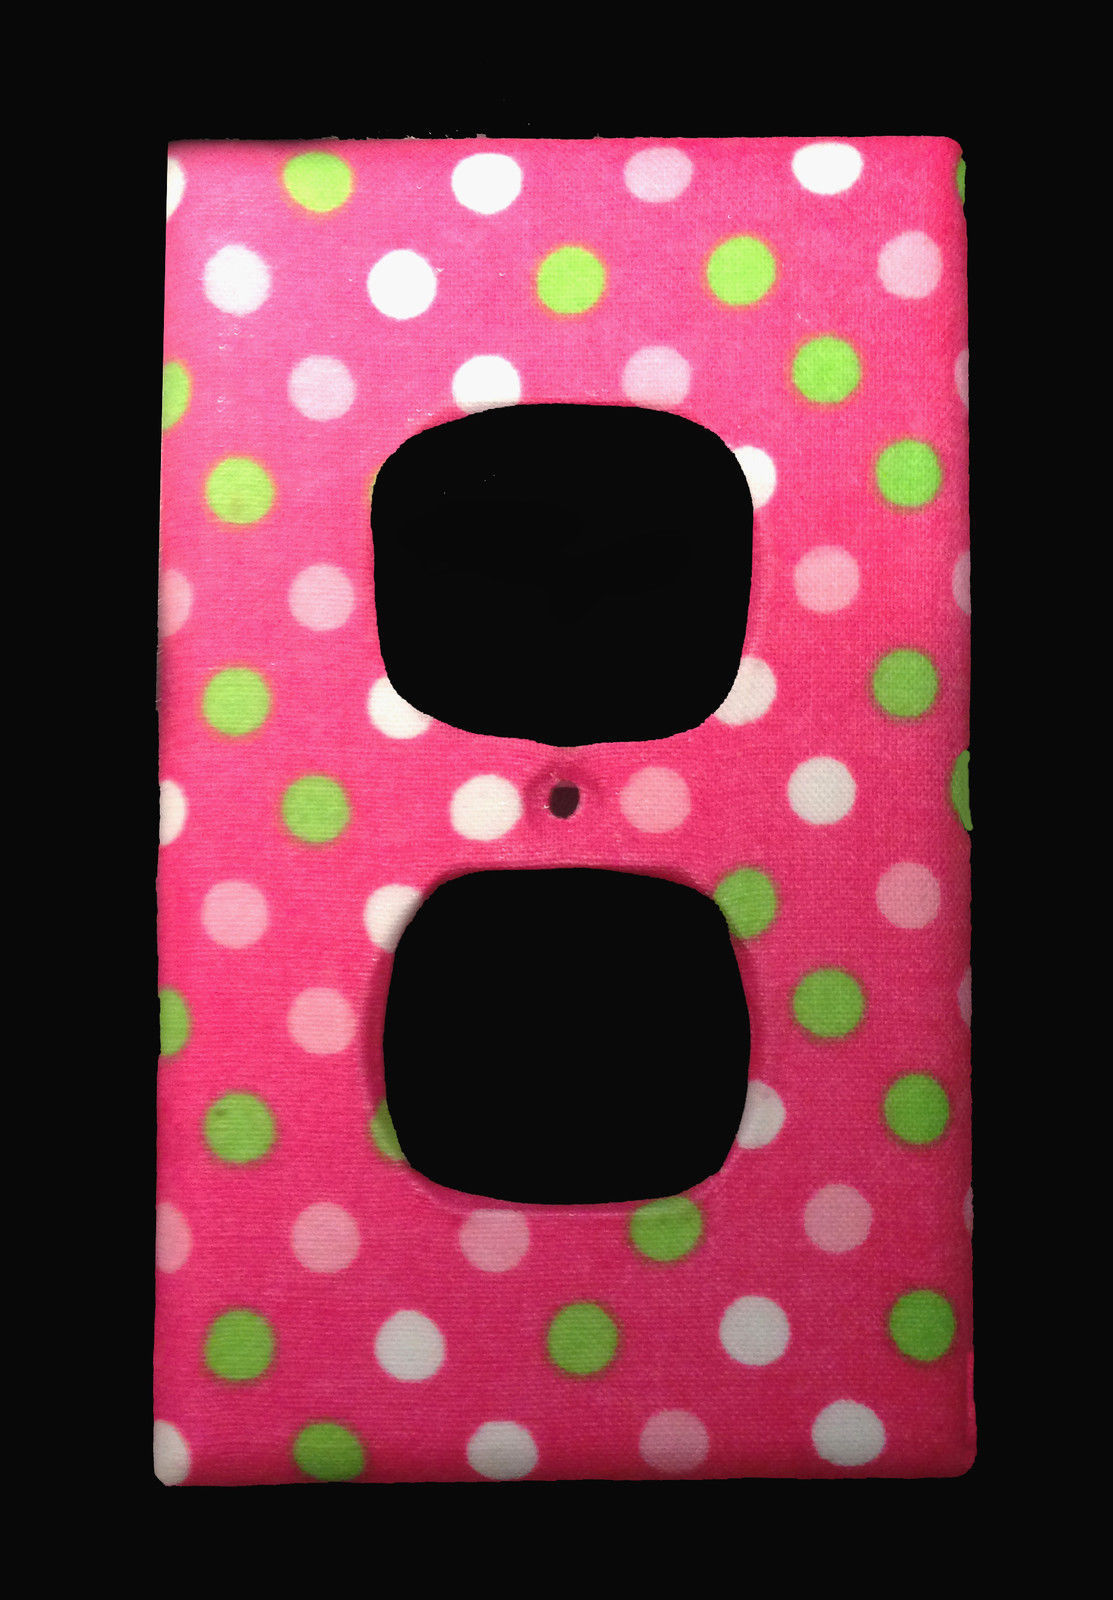 Handmade Fabric Green, Pink & White Dots on Pink Duplex Receptacle Cover - $7.00